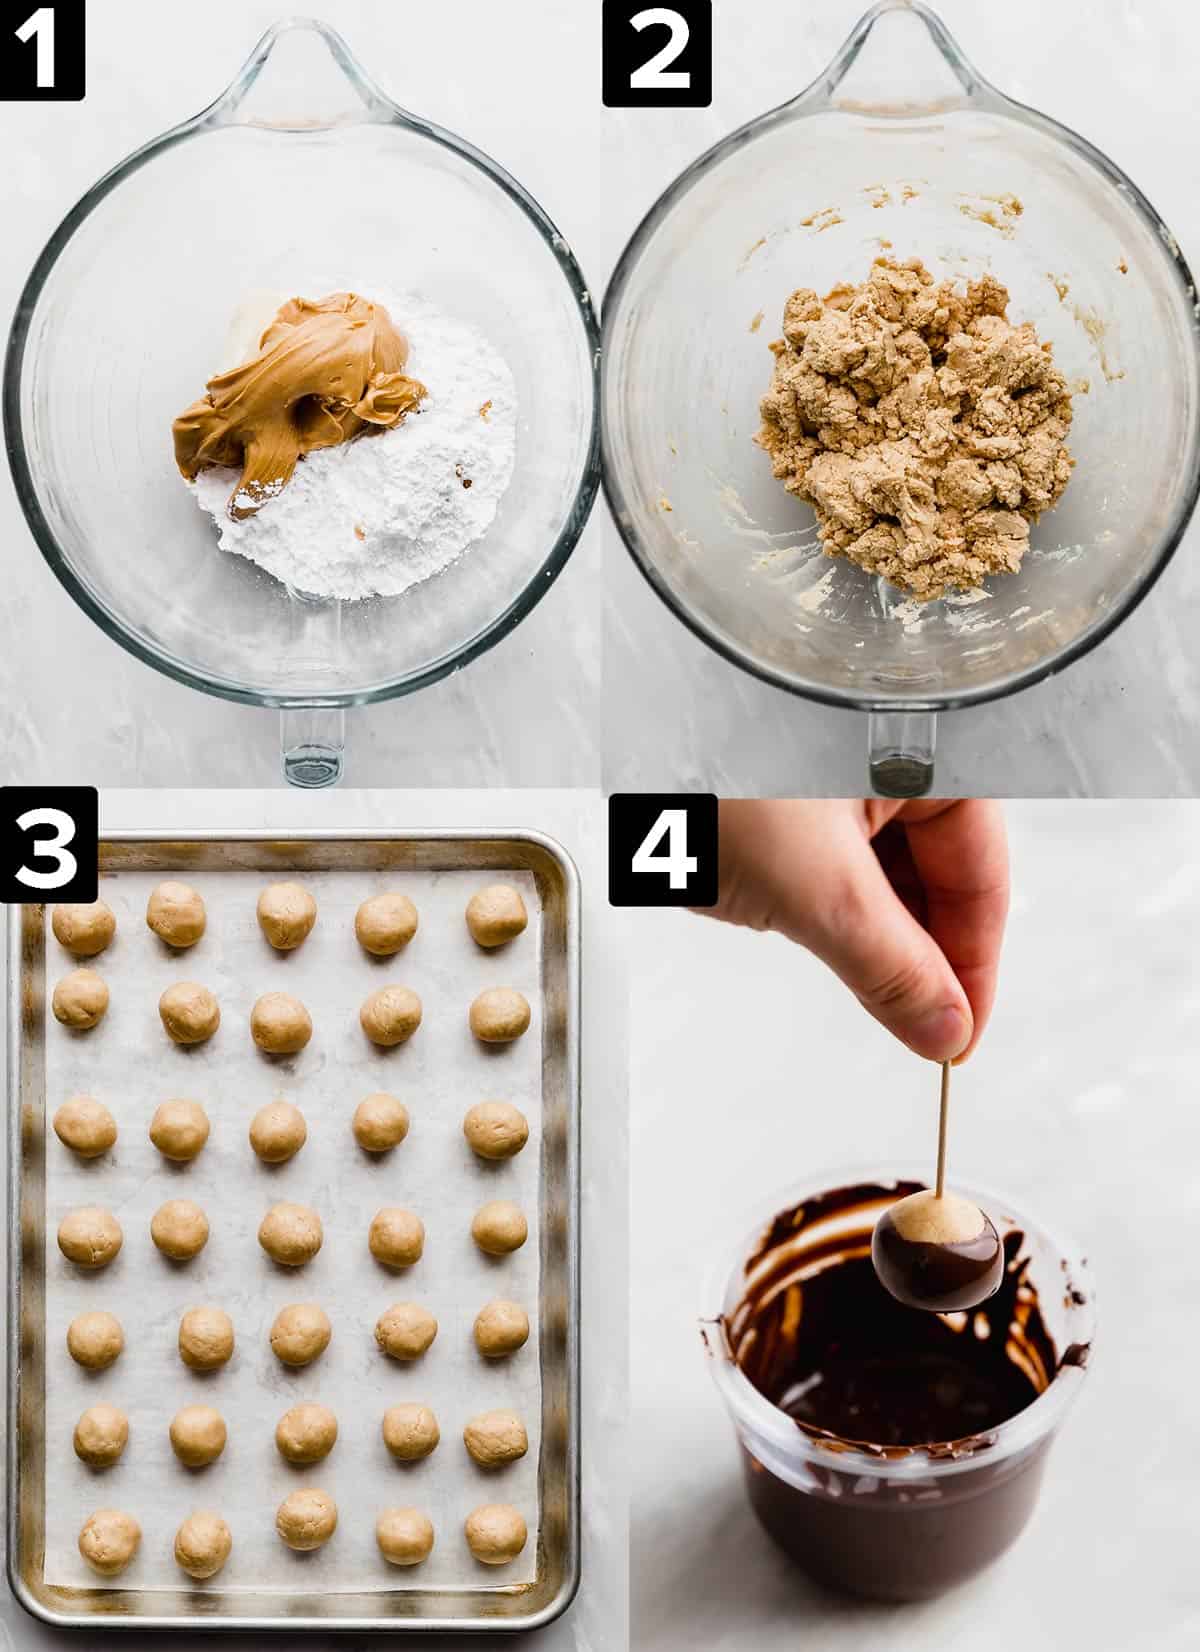 Four photos illustrating how to make chocolate peanut butter Buckeyes balls.